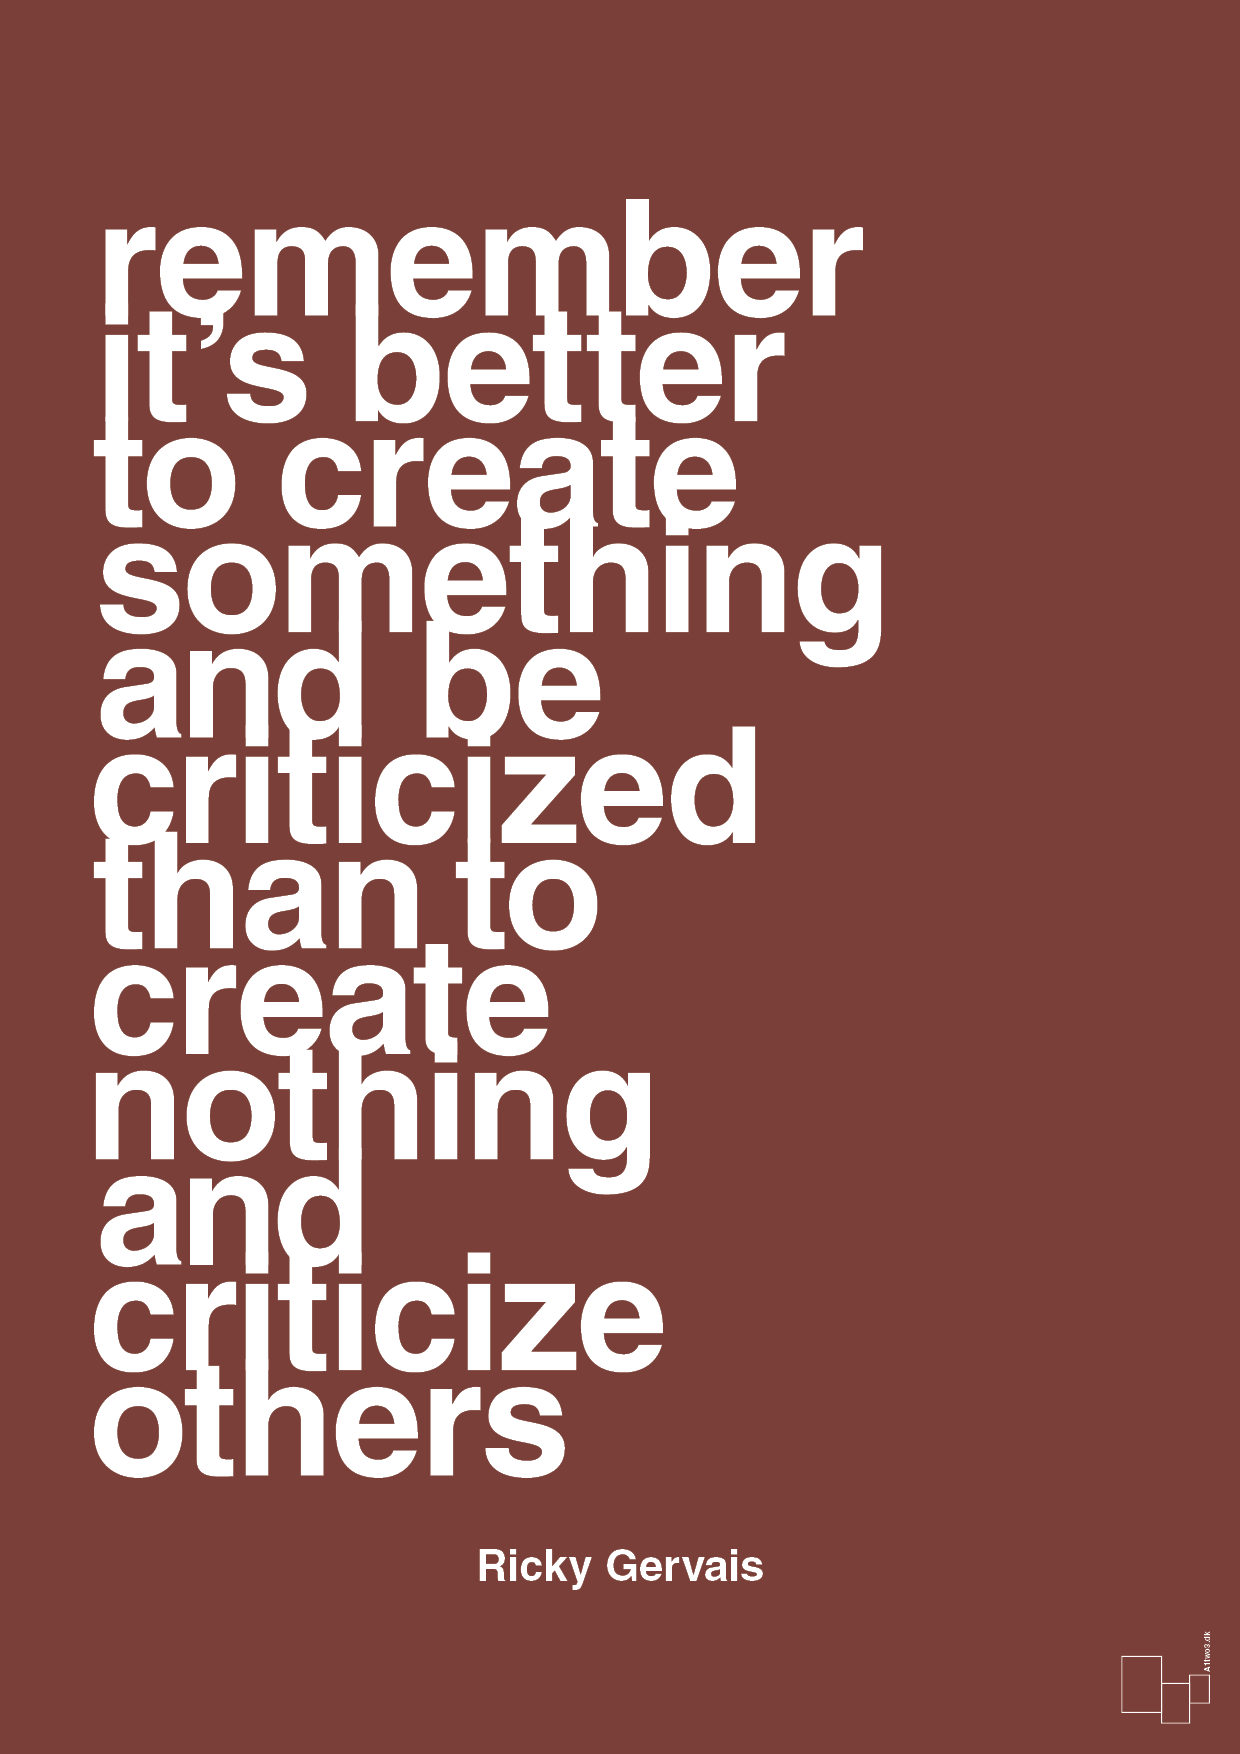 remember its better to create something and be criticized than create nothing and criticize others - Plakat med Citater i Red Pepper